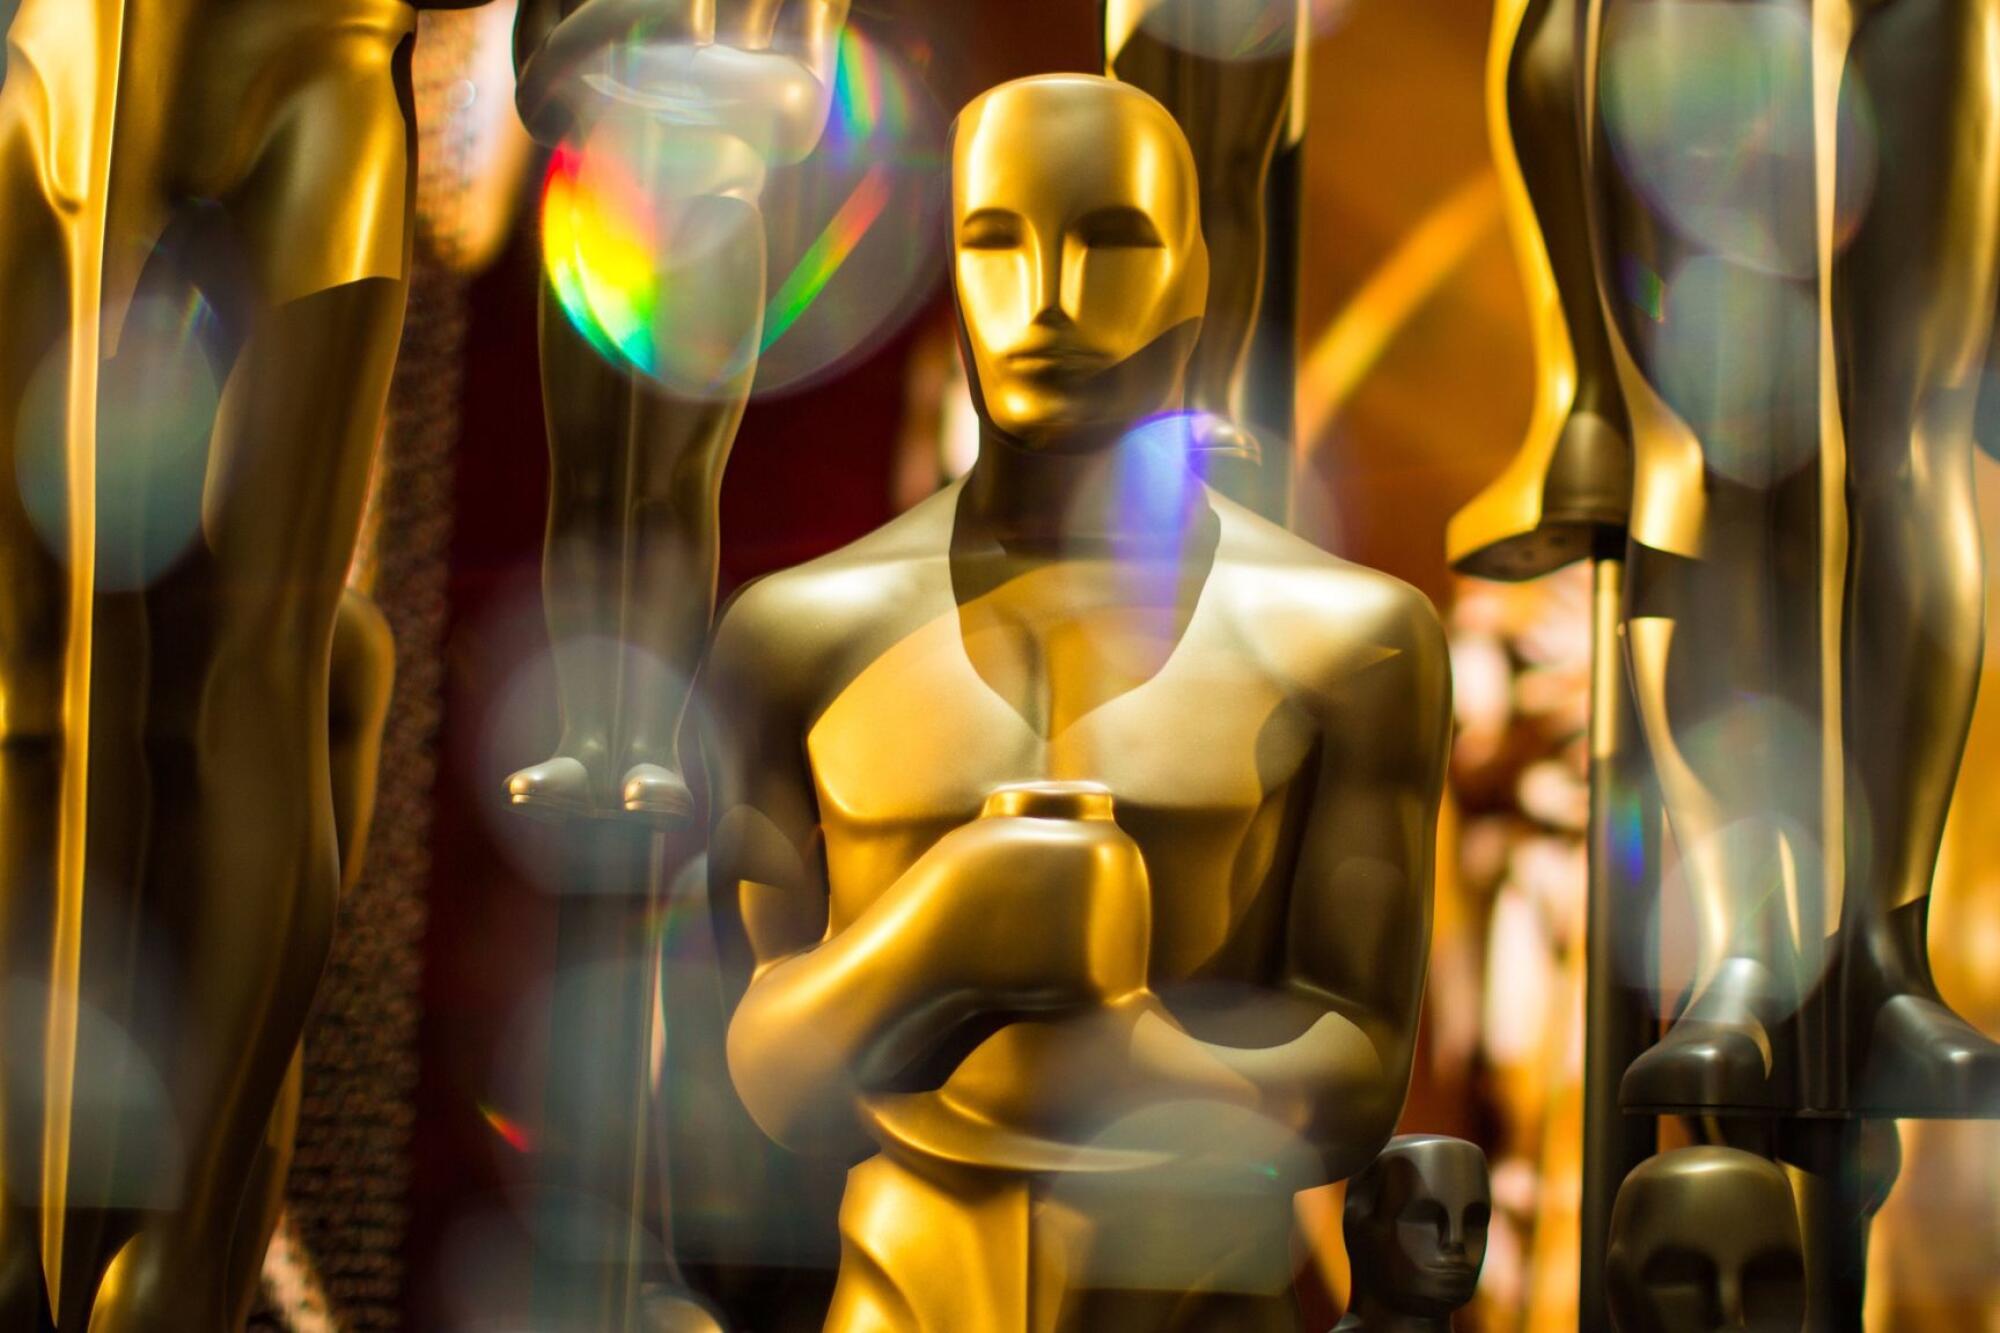 Oscar statues backstage at the 88th Academy Awards in 2016.